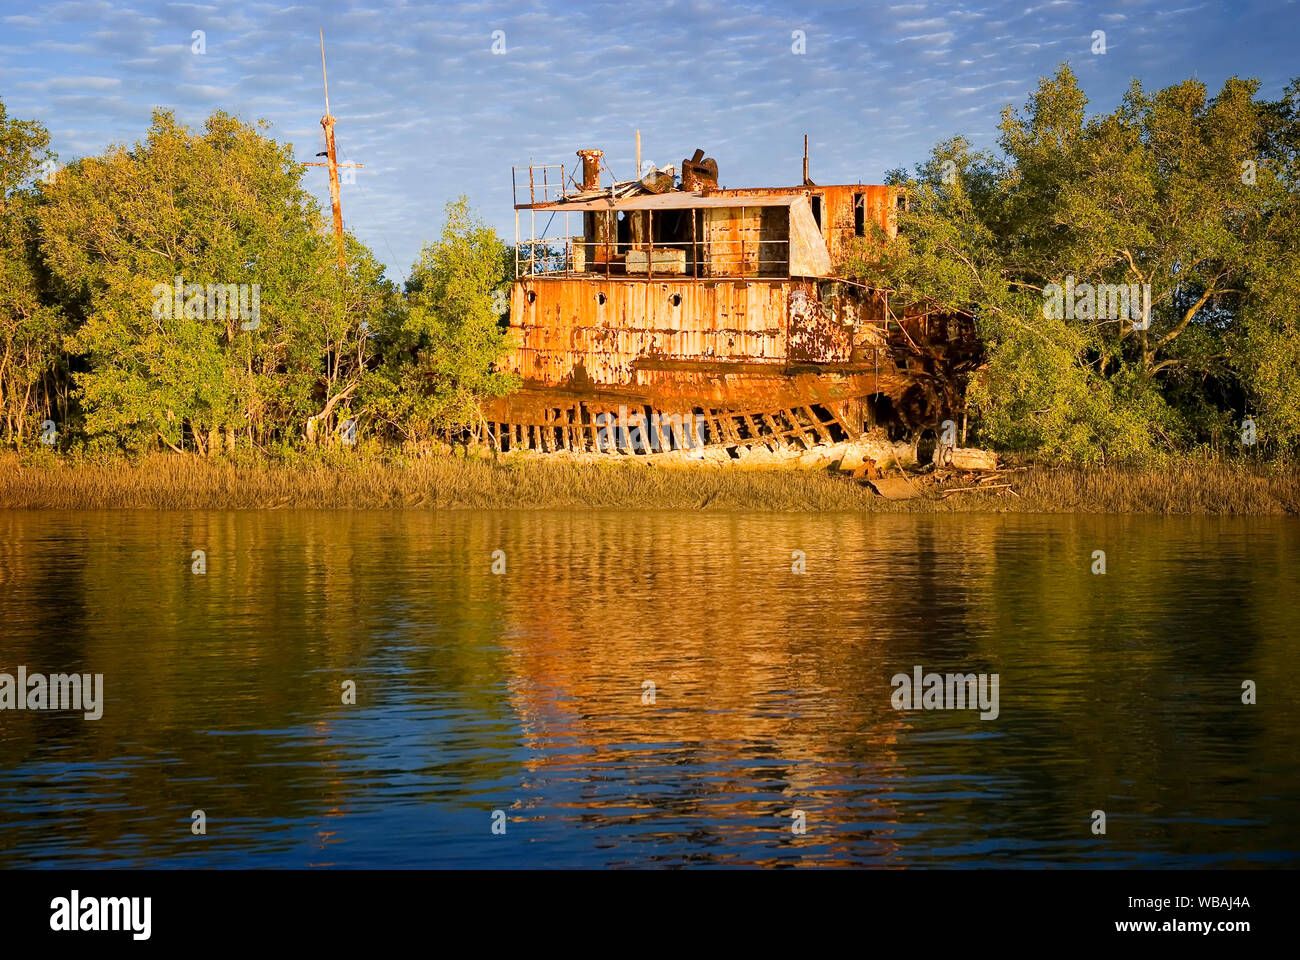 Rusting hulk of the cargo ship Katoora,  in mangroves on the banks of the Norman River. Once the largest ship in the region it was dragged from its mo Stock Photo